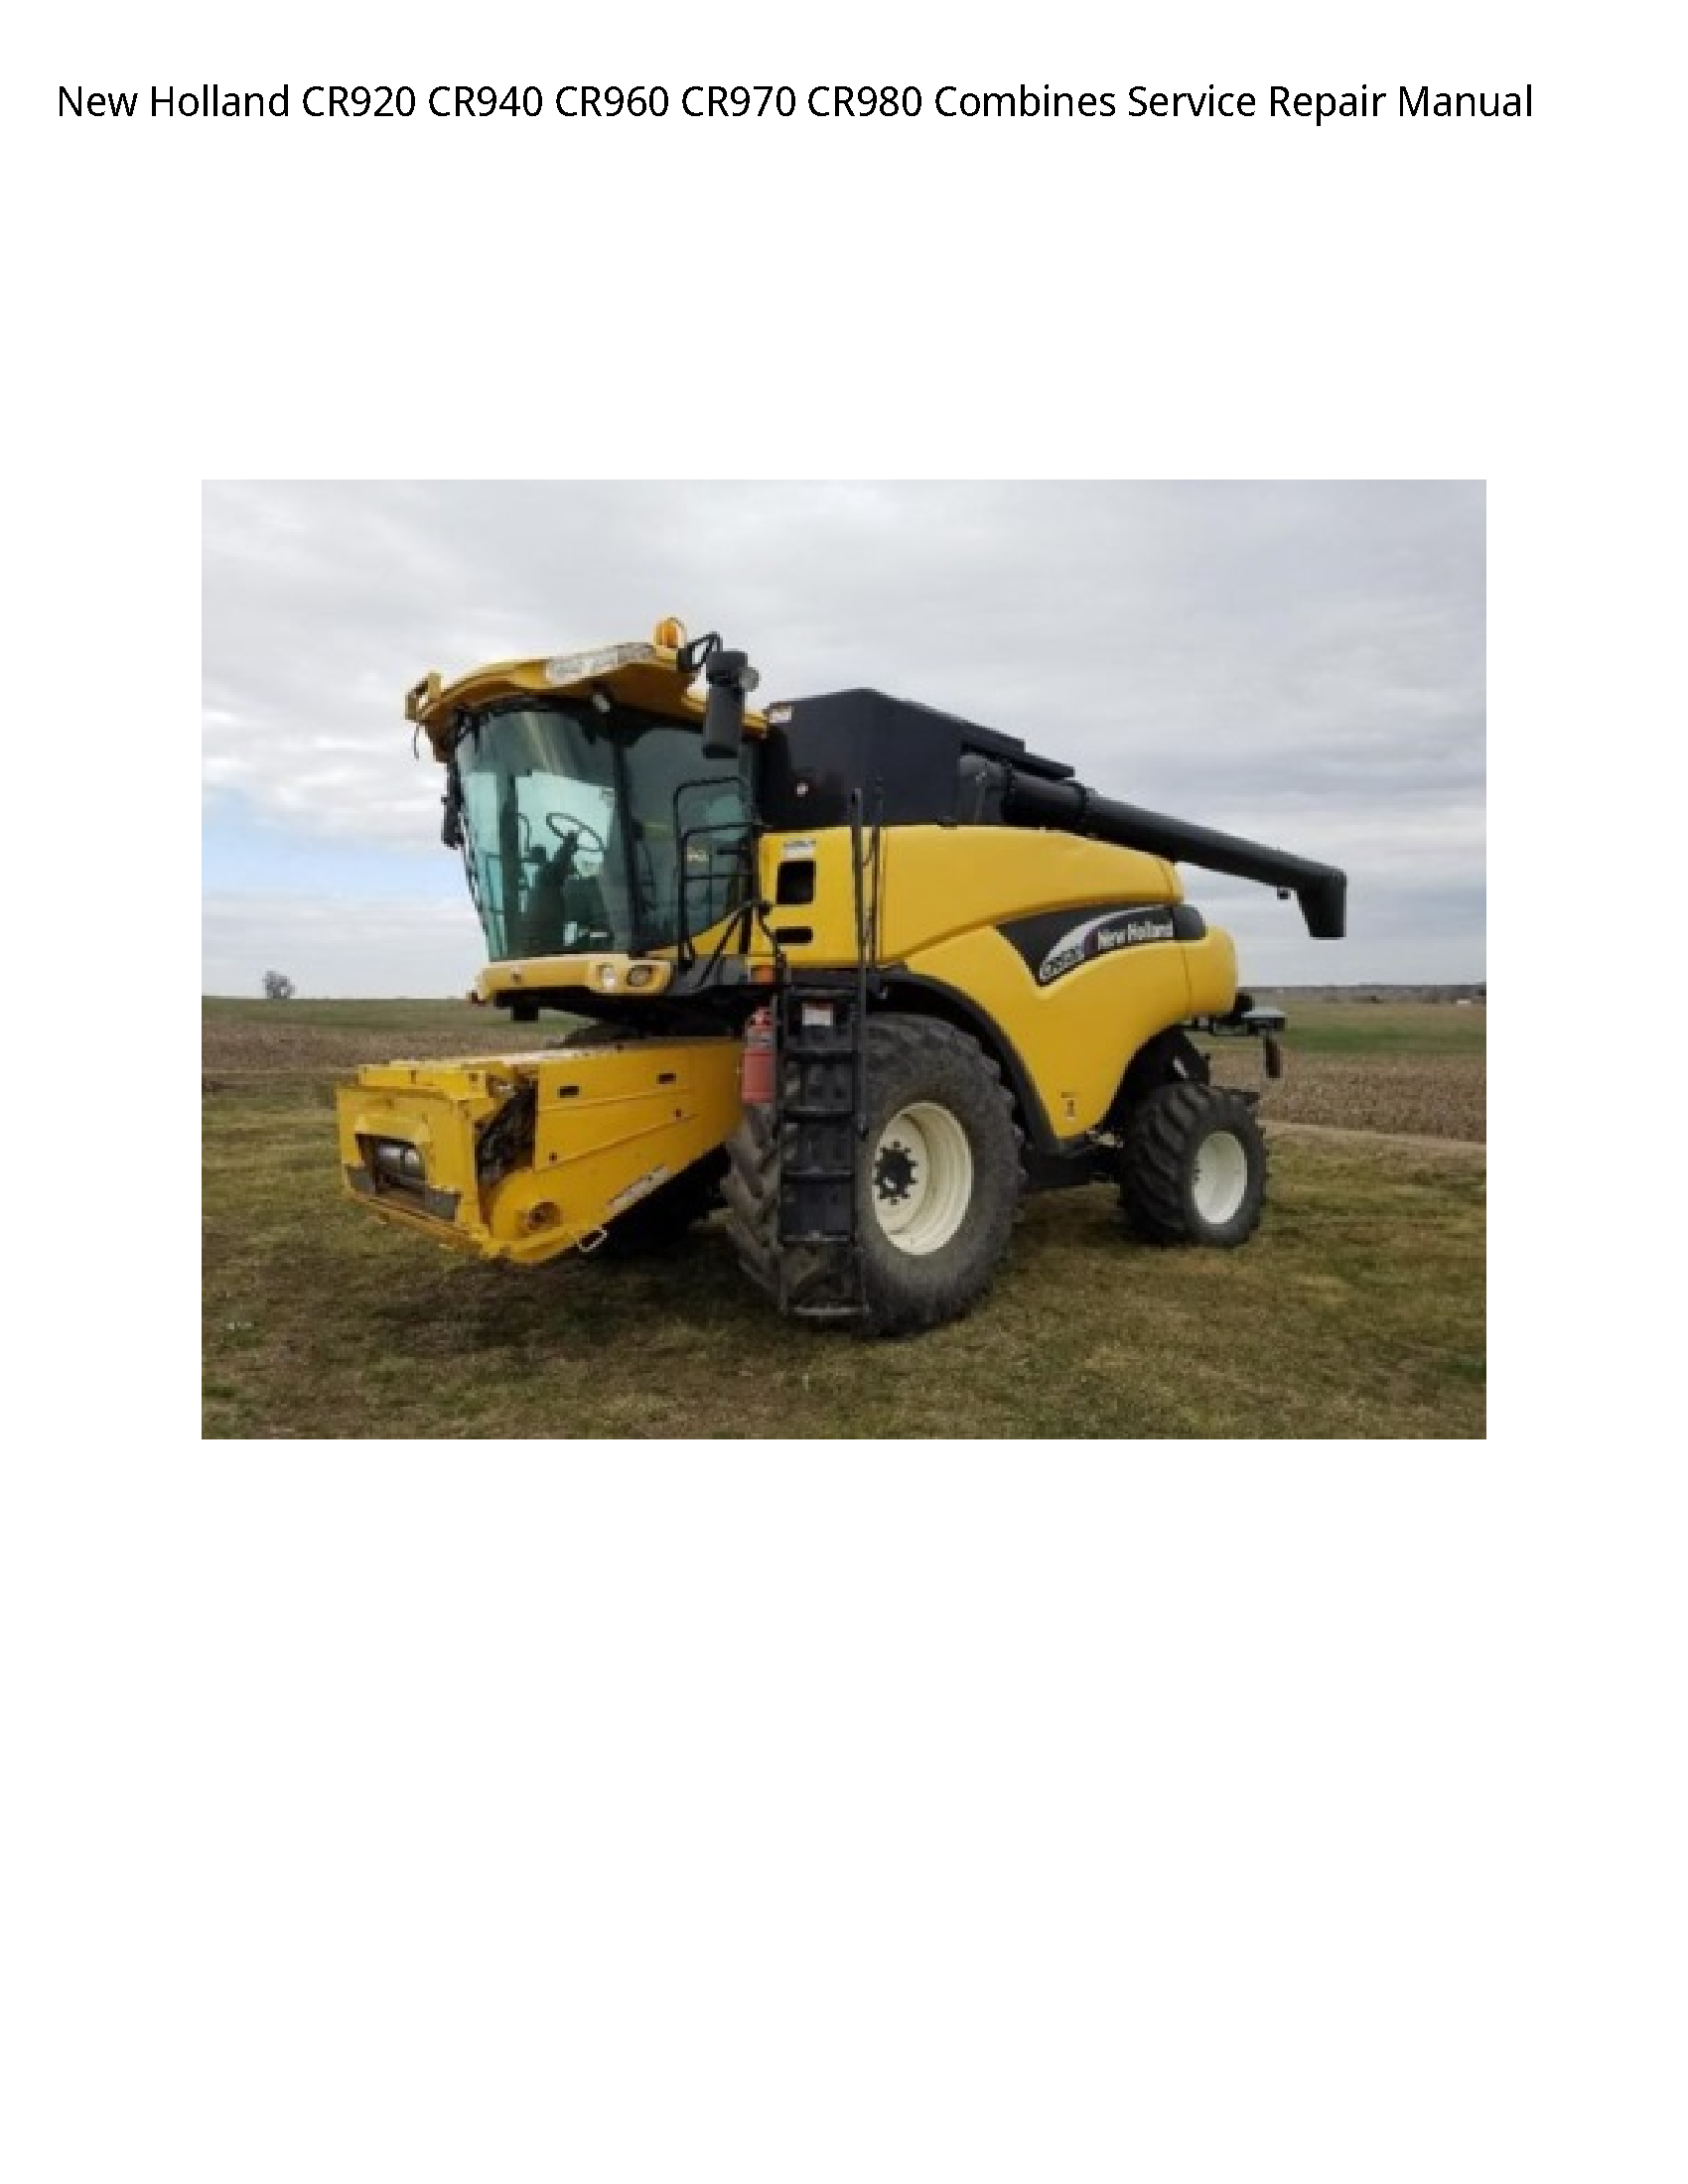 New Holland CR920 Combines manual